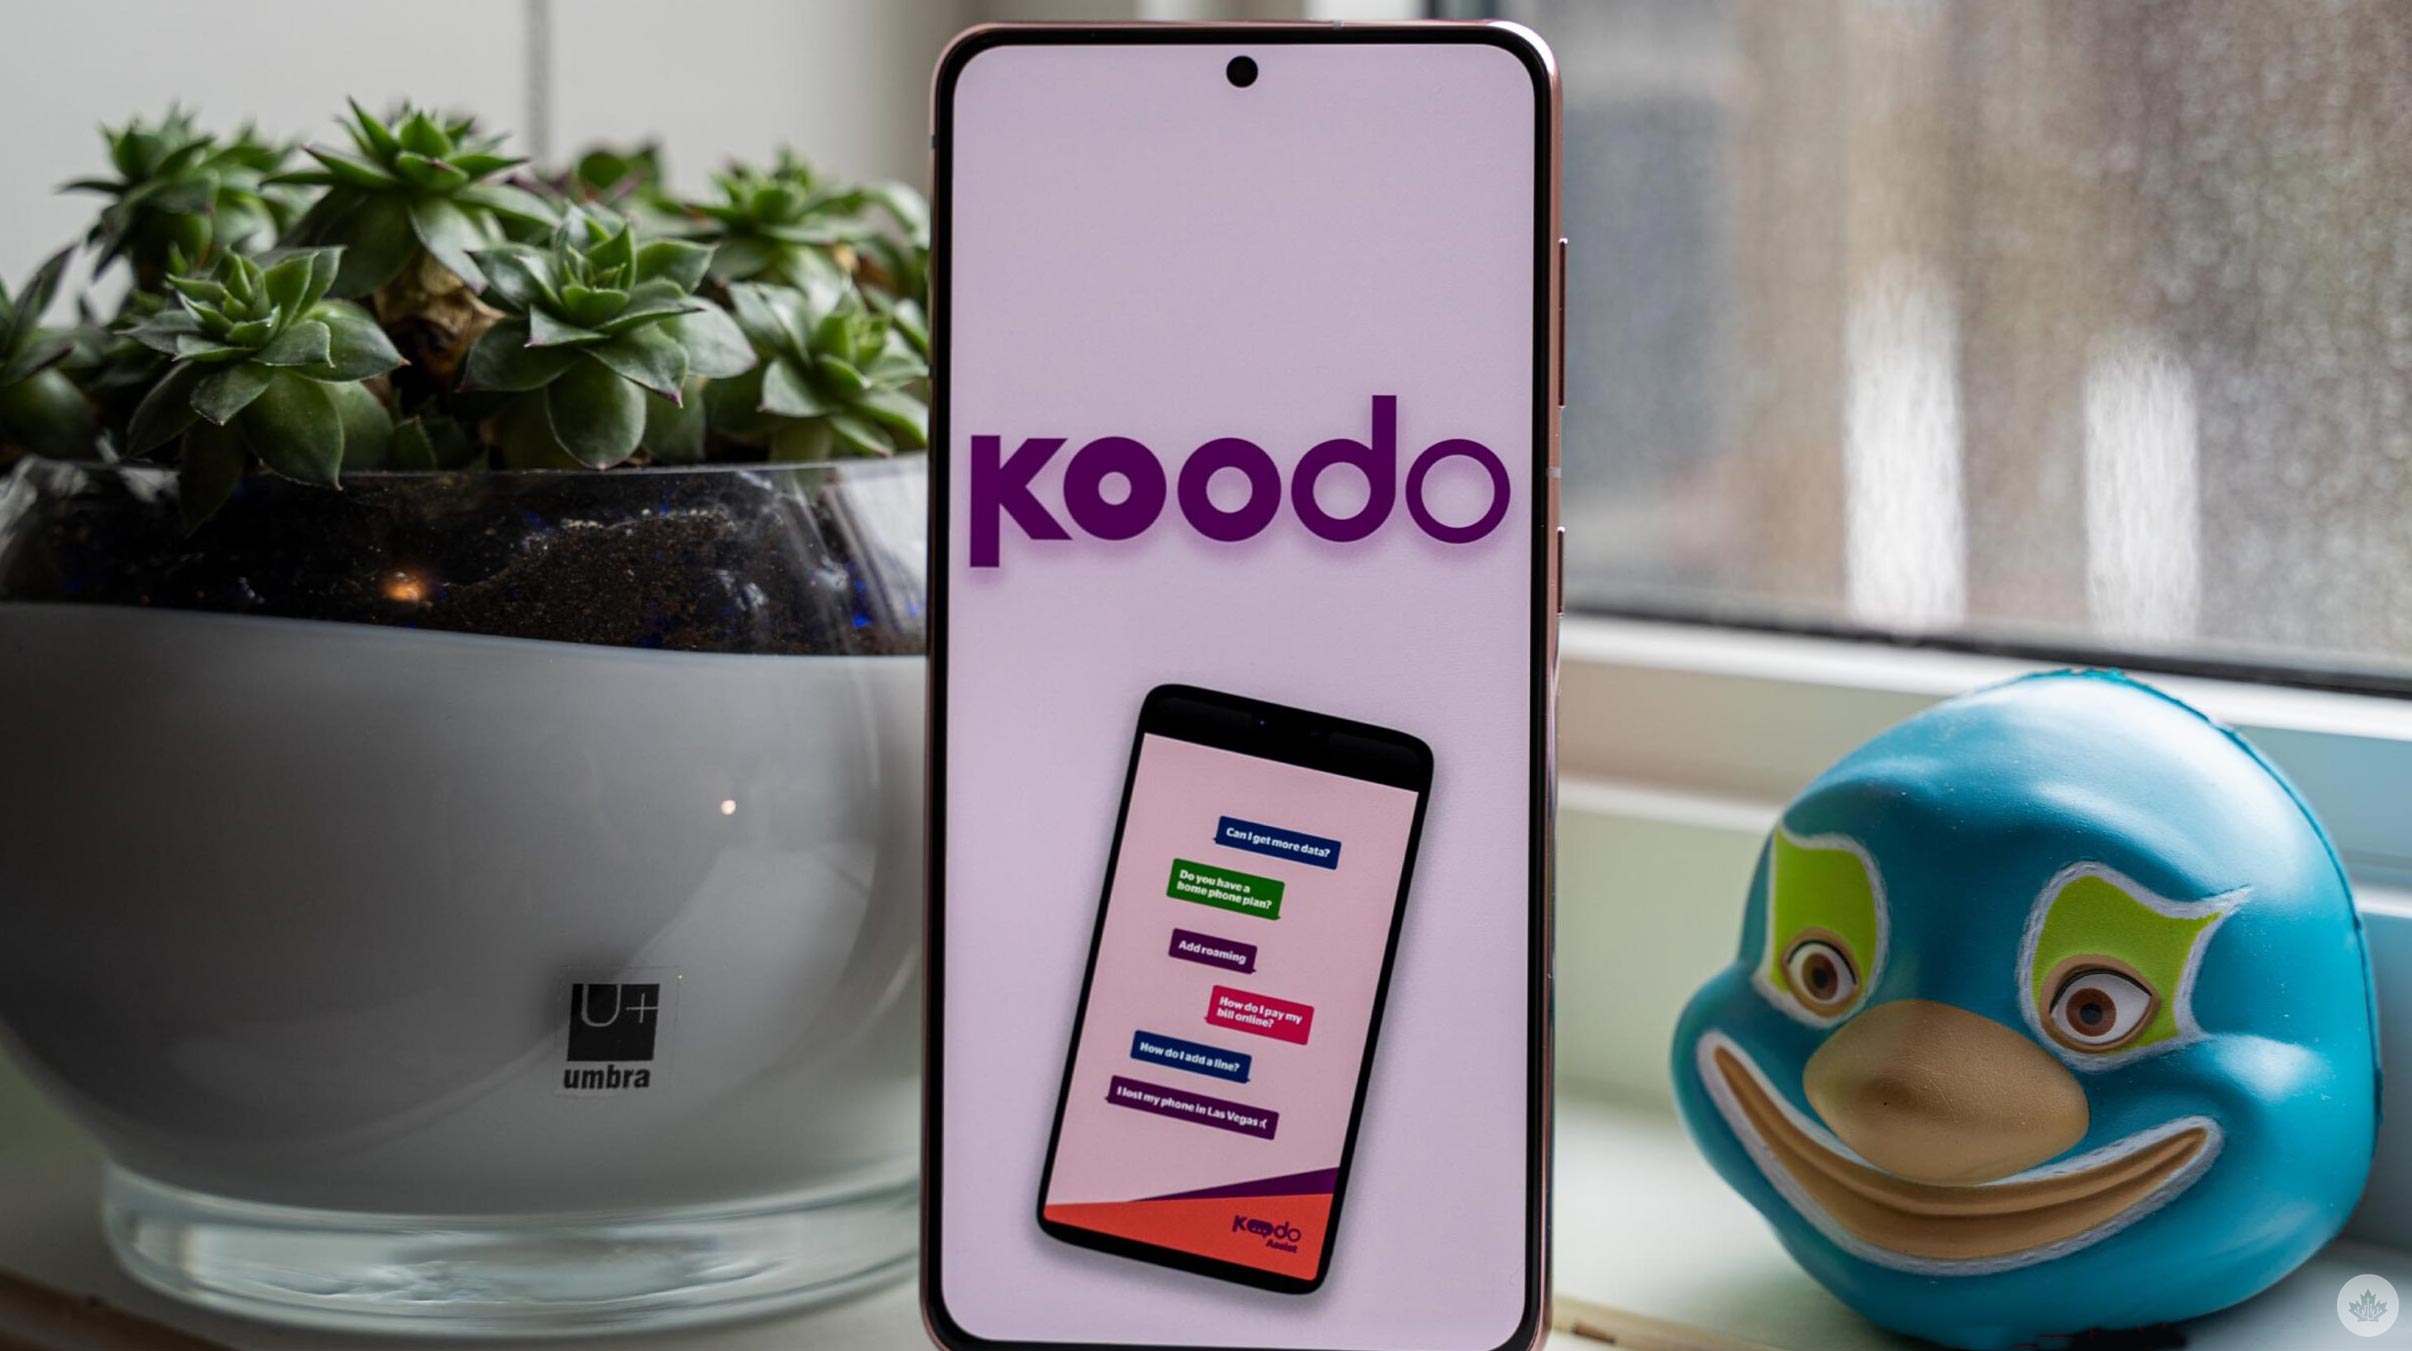 Koodo offers $1 discount on 8GB plan while increasing cost of 15GB plan by $5